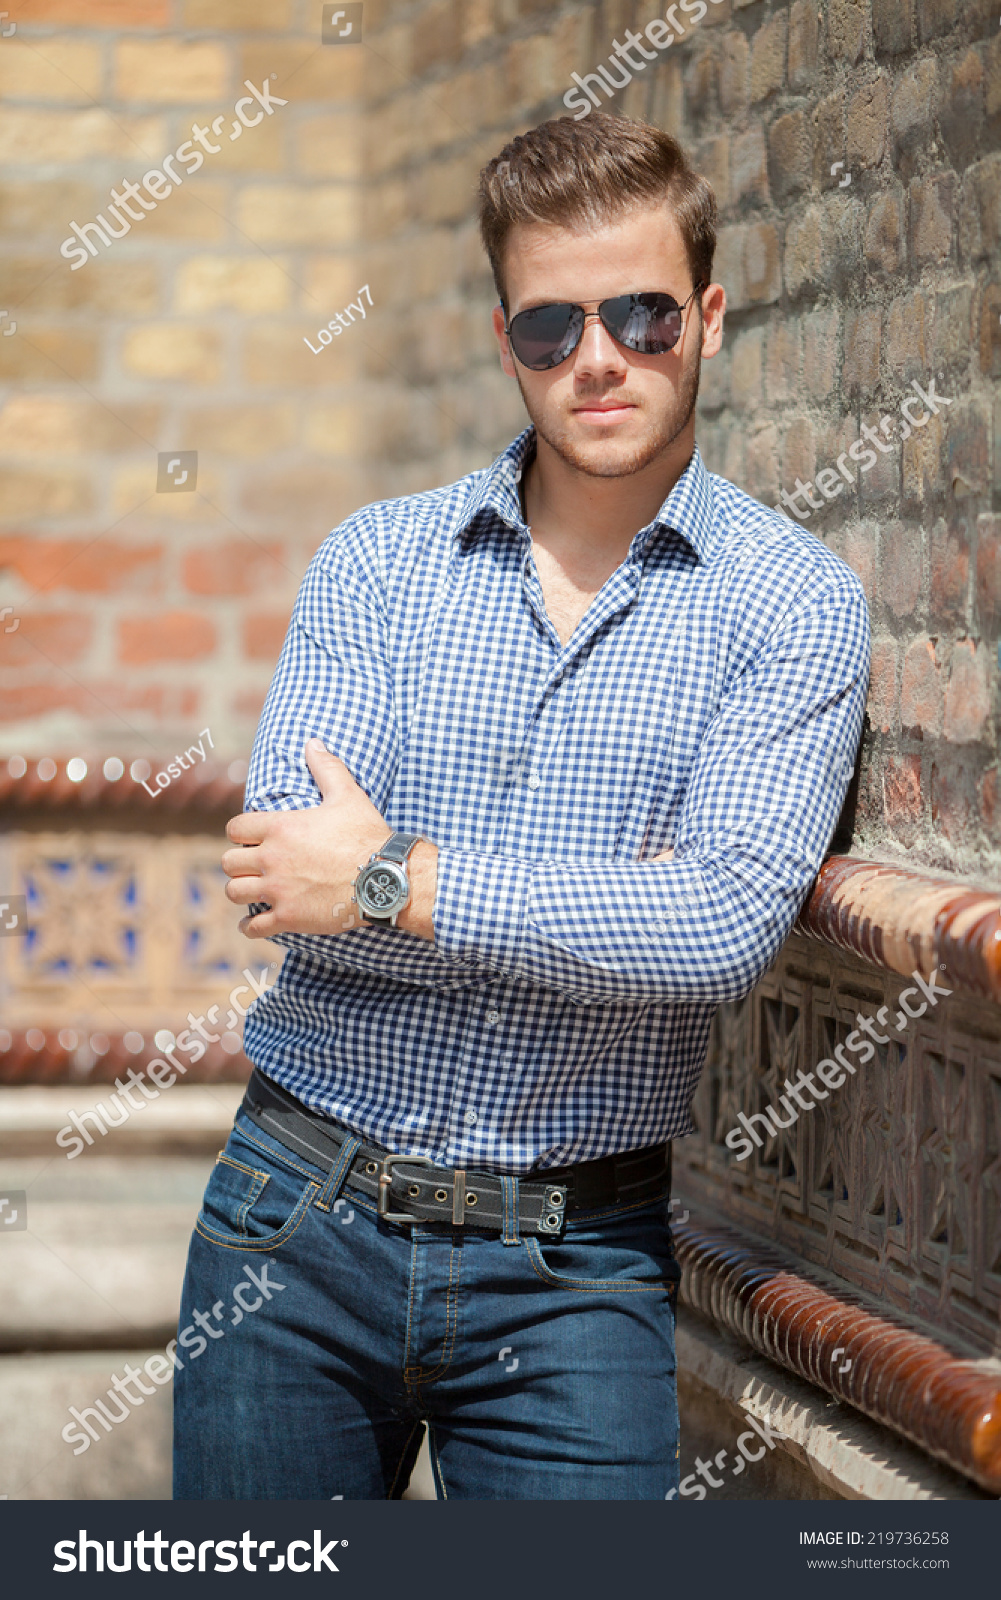 Handsome Young Man Wearing A Blue Shirt And Jeans. Street Shooting In ...